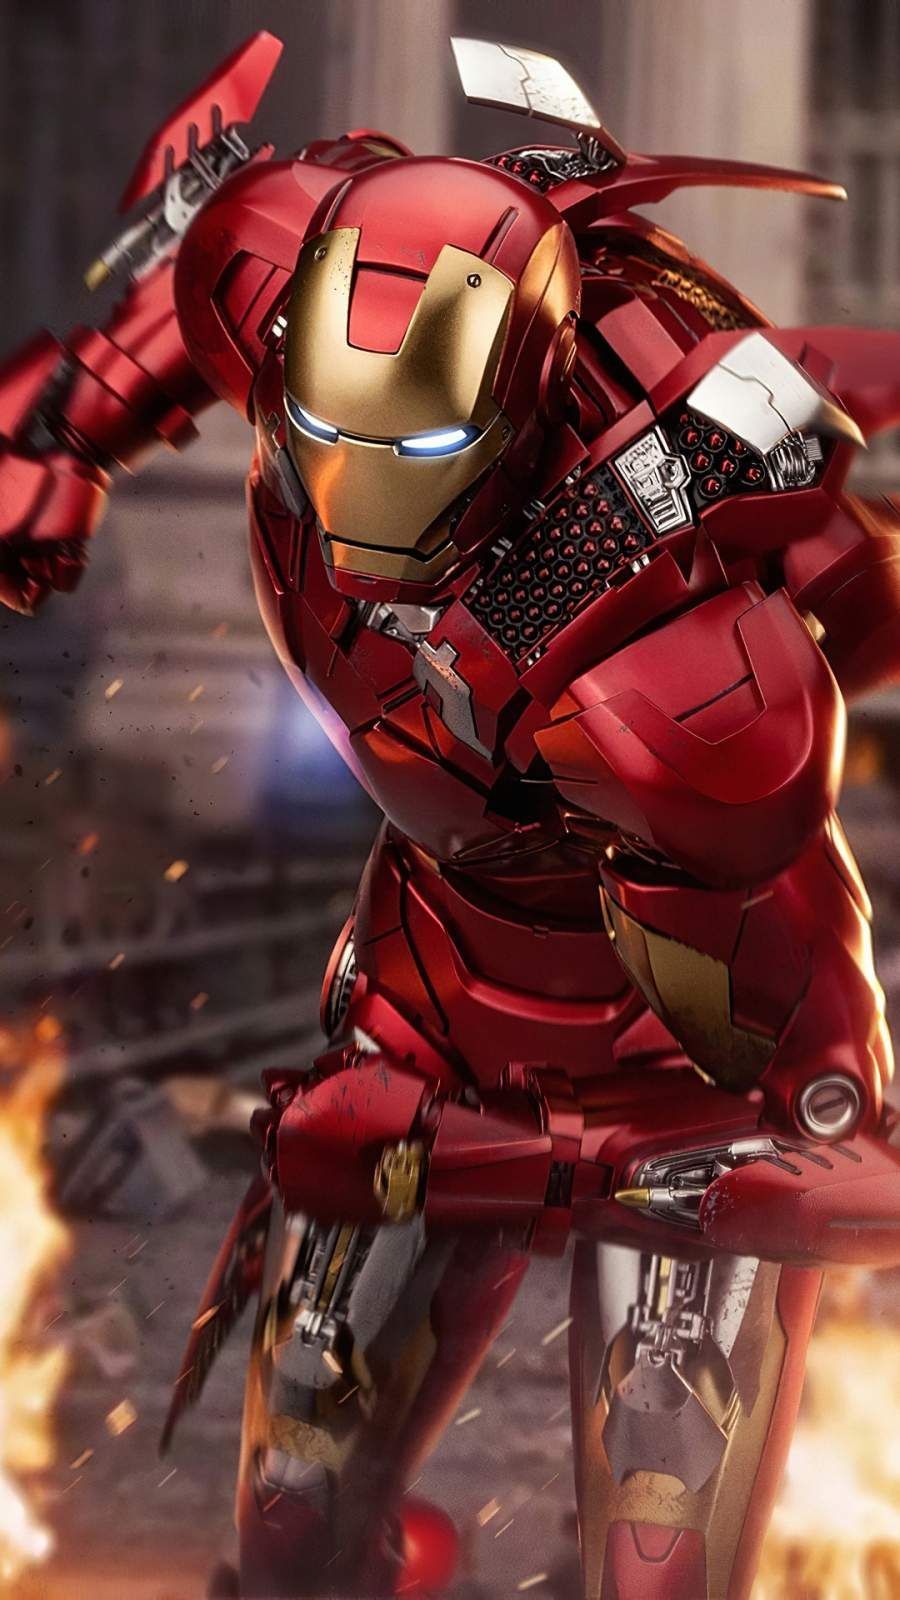 iPhone Wallpaper for iPhone iPhone iPhone X, iPhone XR, iPhone 8 Plus High Quality Wallpaper, iPad Back. Iron man wallpaper, Iron man avengers, Iron man